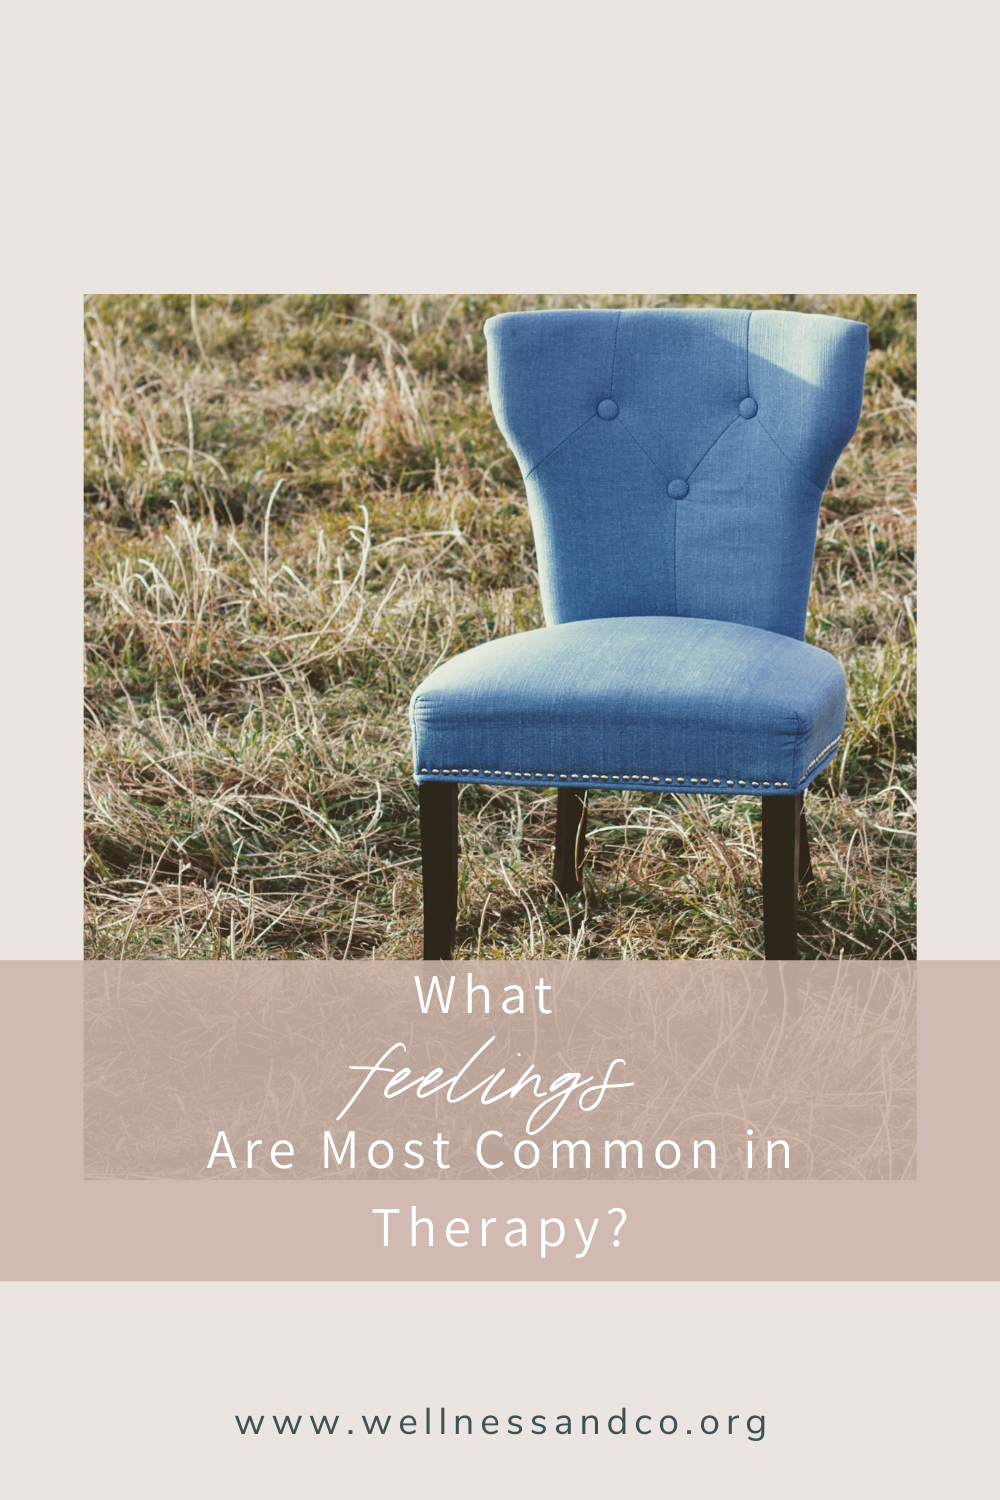 What Feelings Are Most Common in Therapy? | Curious what clients feel when they come to therapy? 